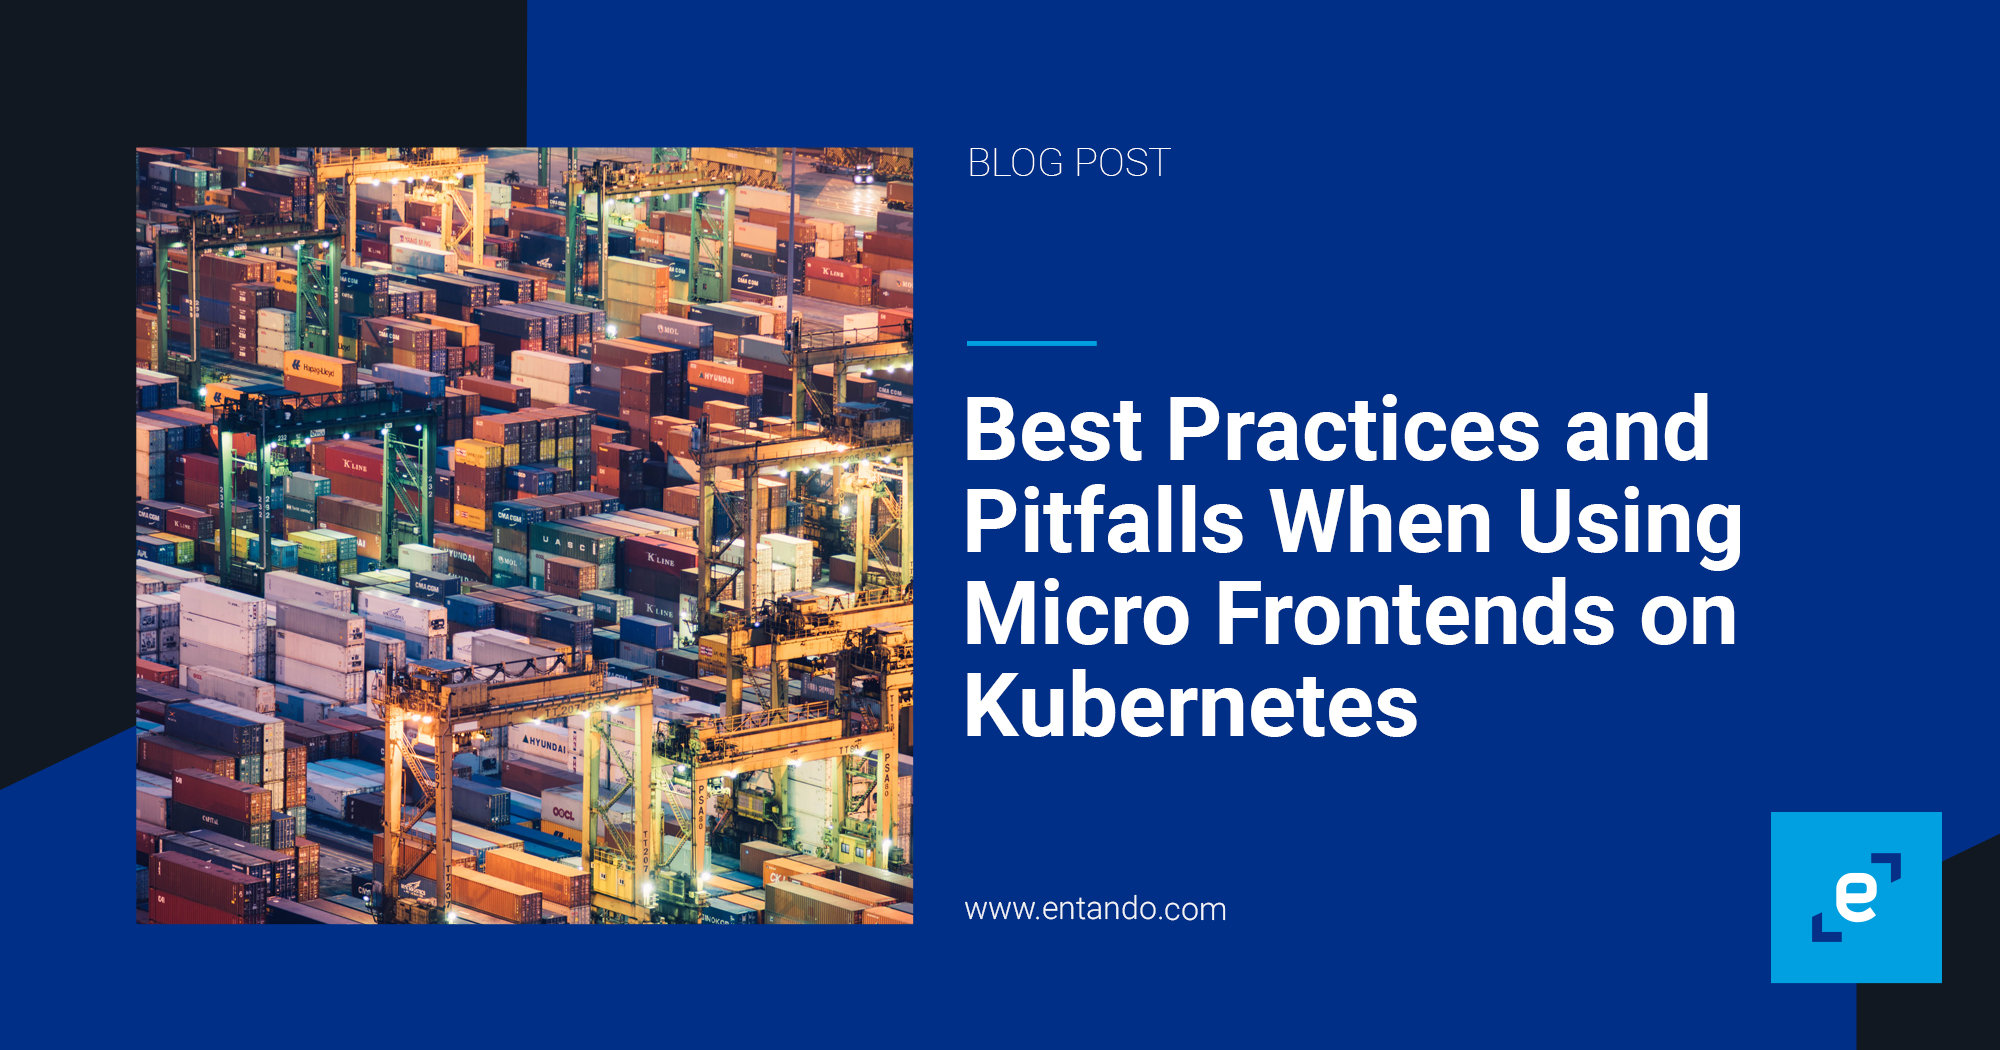 Best Practices and Pitfalls When Using Micro Frontends on Kubernetes_Card.jpg